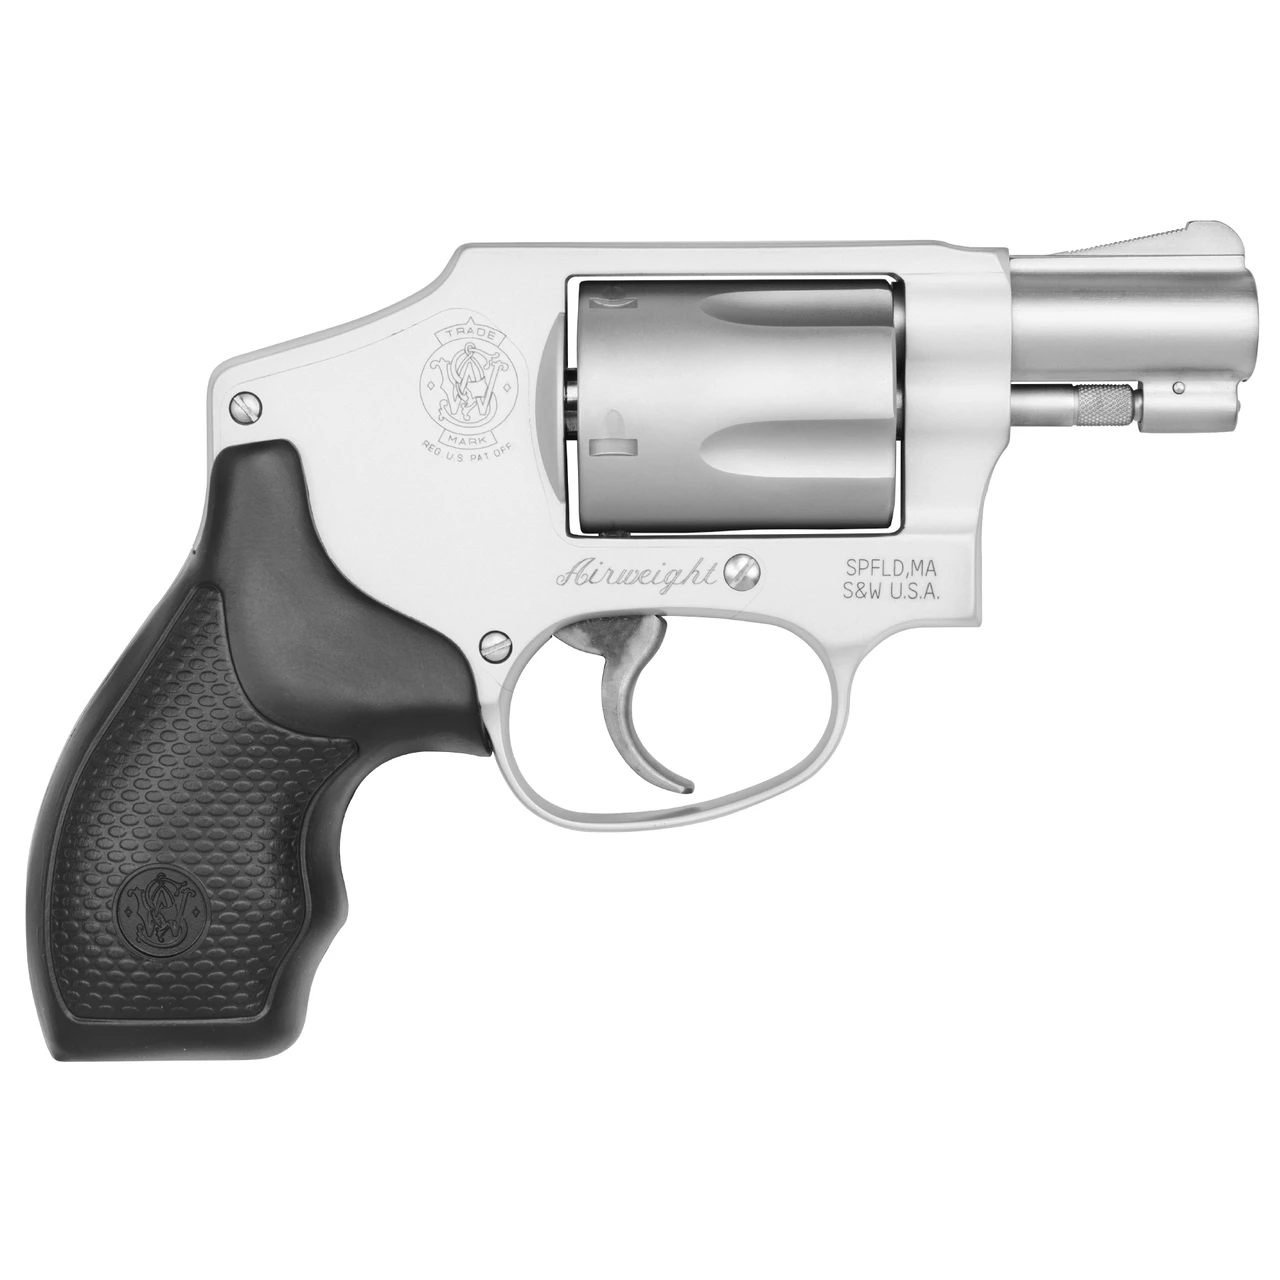 SMITH &WESSON